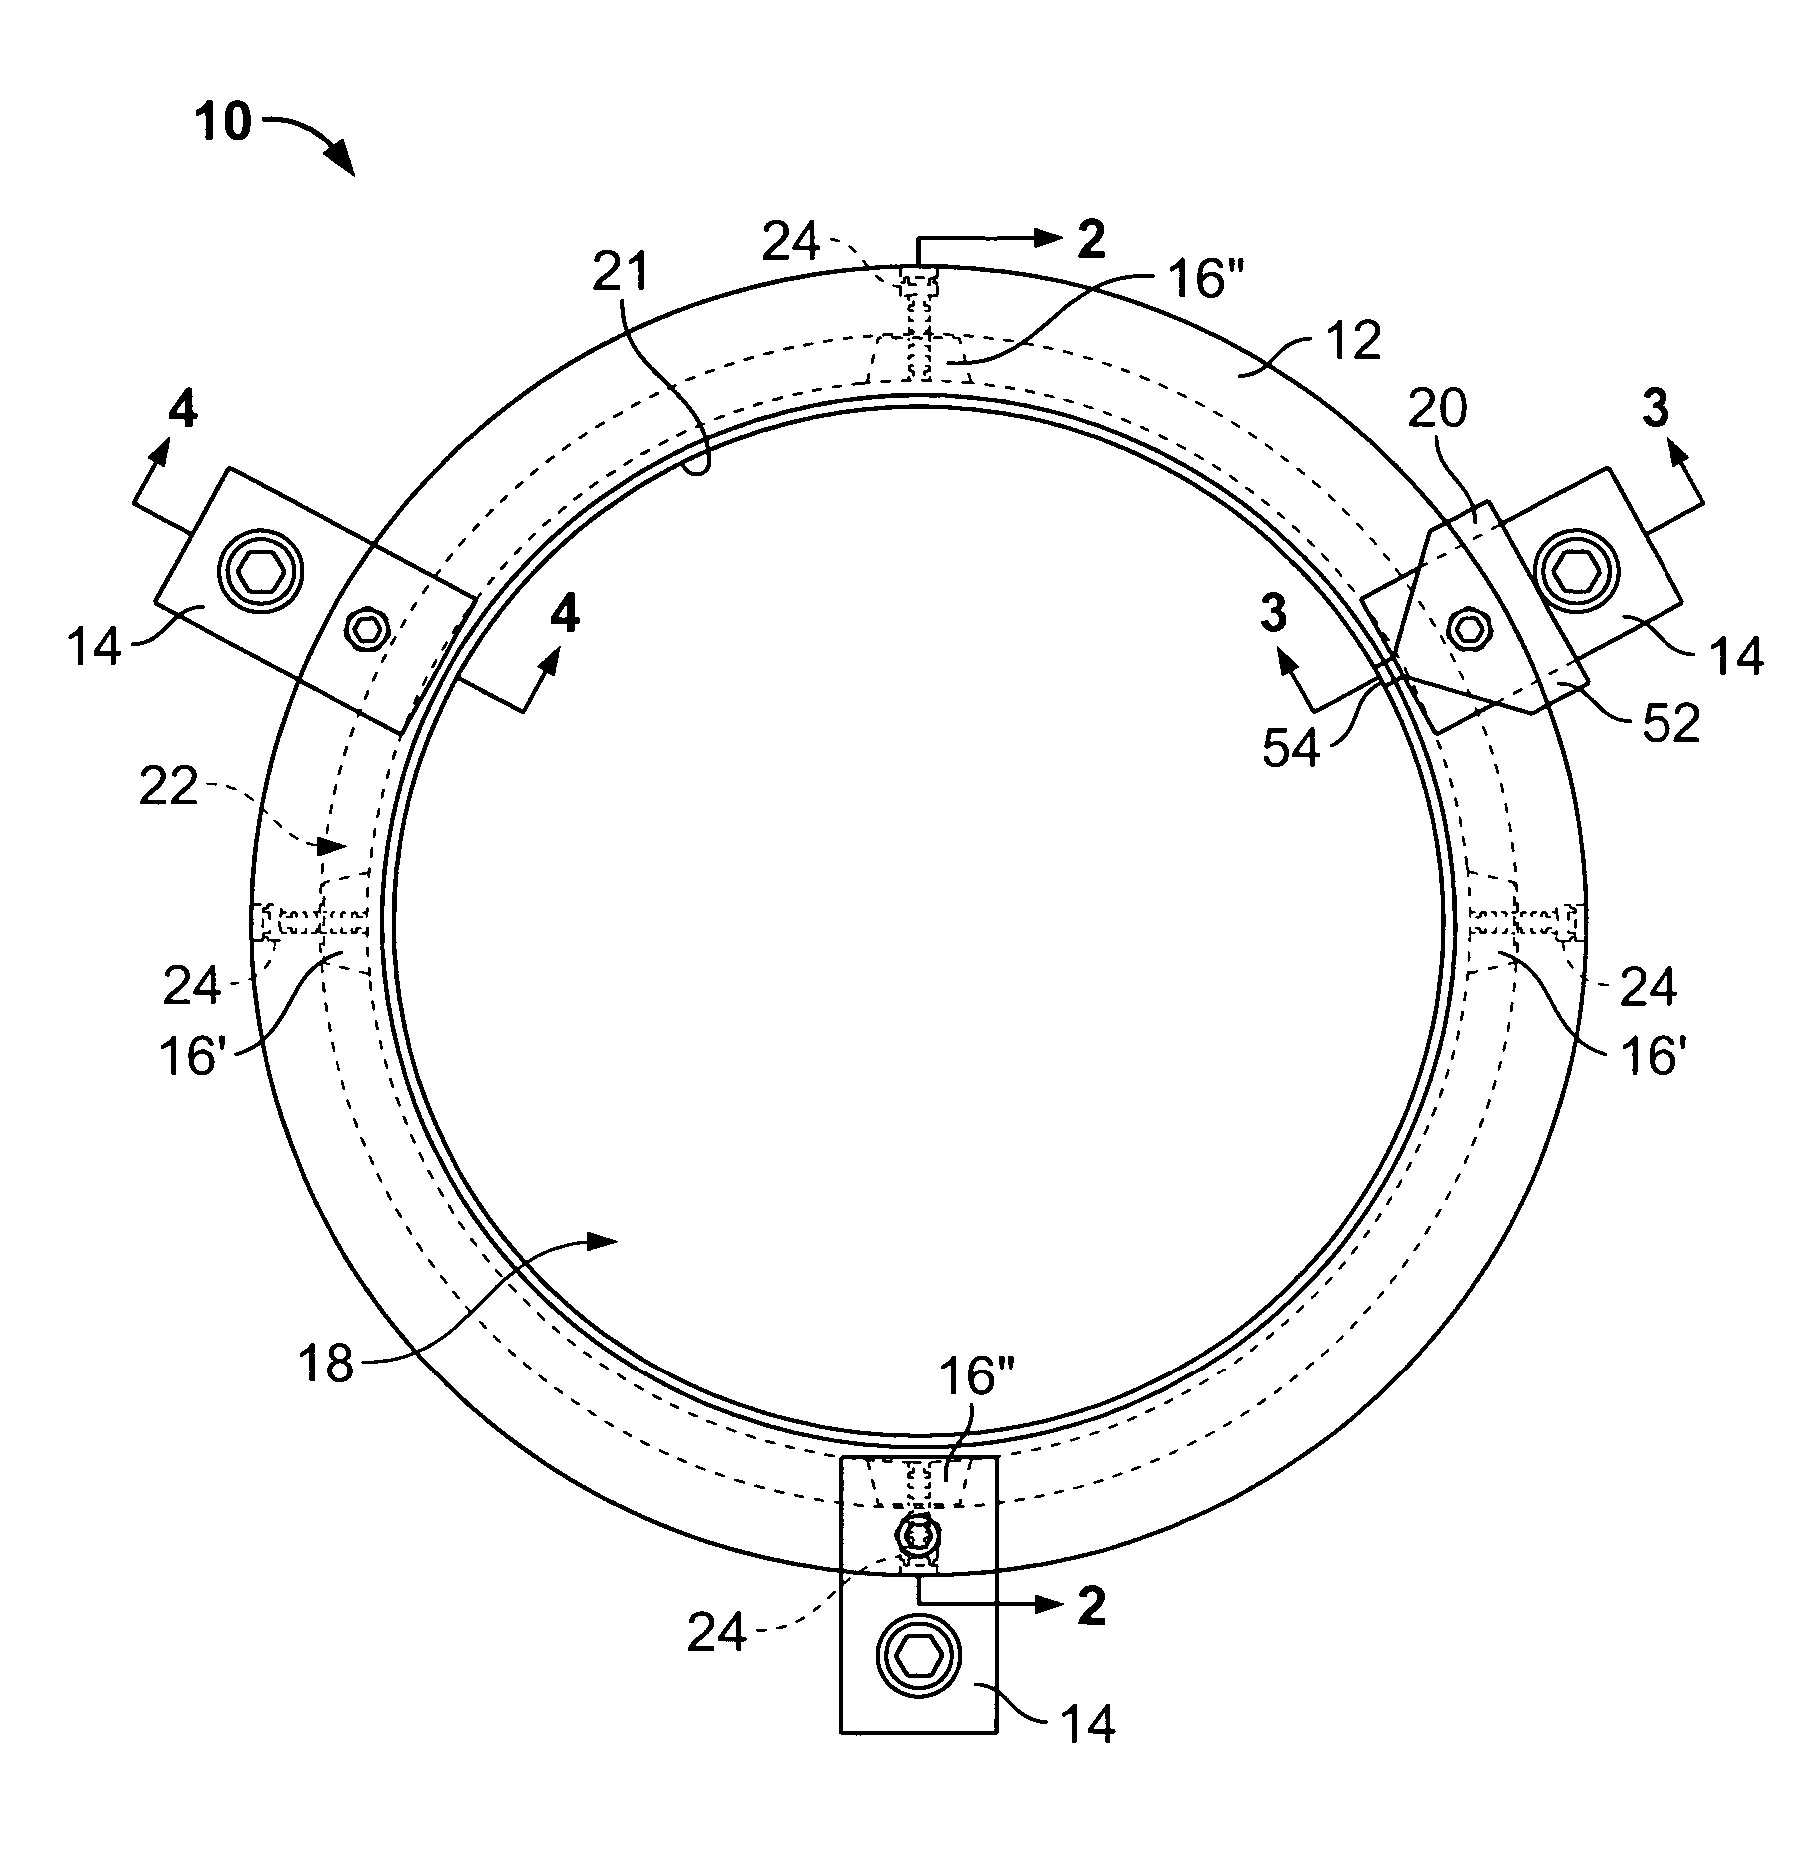 Grounding system for a rotating shaft